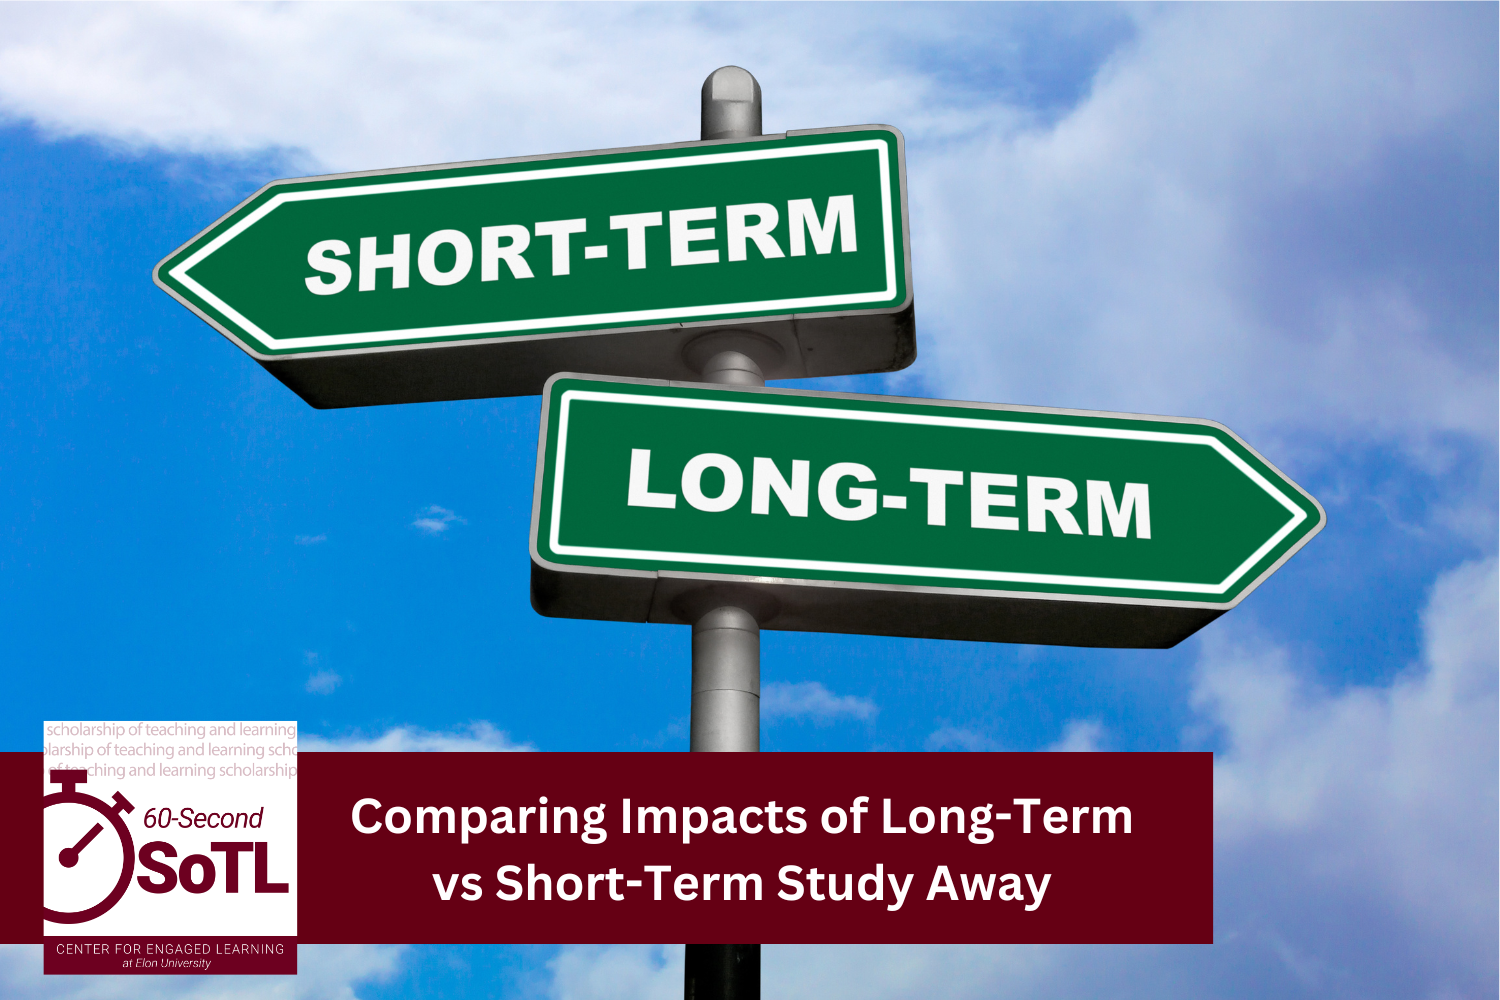 Directional signs point in opposite directions; one says, "short-term," and one says, "long-term." An overlay reads, "60-Second SoTL: Comparing Impacts of Long-Term vs Short-Term Study Away."